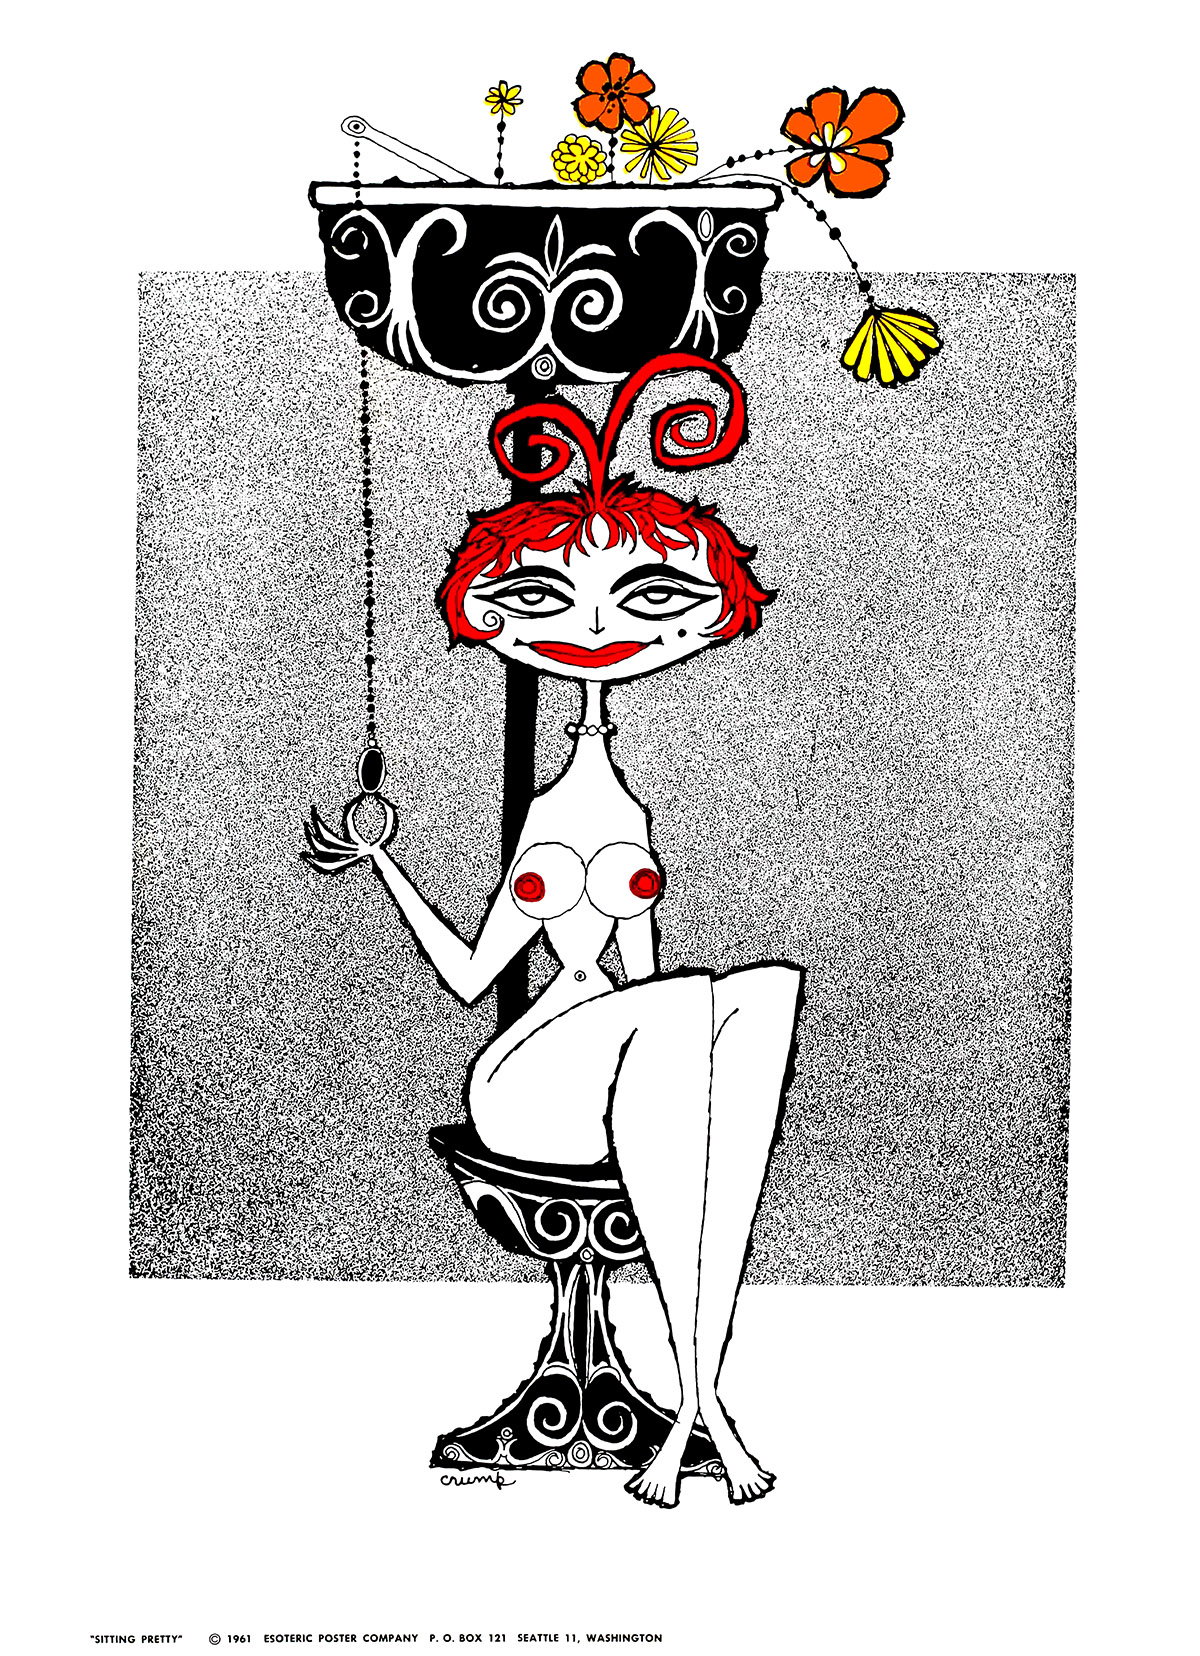 A playful and stylized illustration of a naked red-haired female figure seated on an antique toilet, ready to pull the chain.